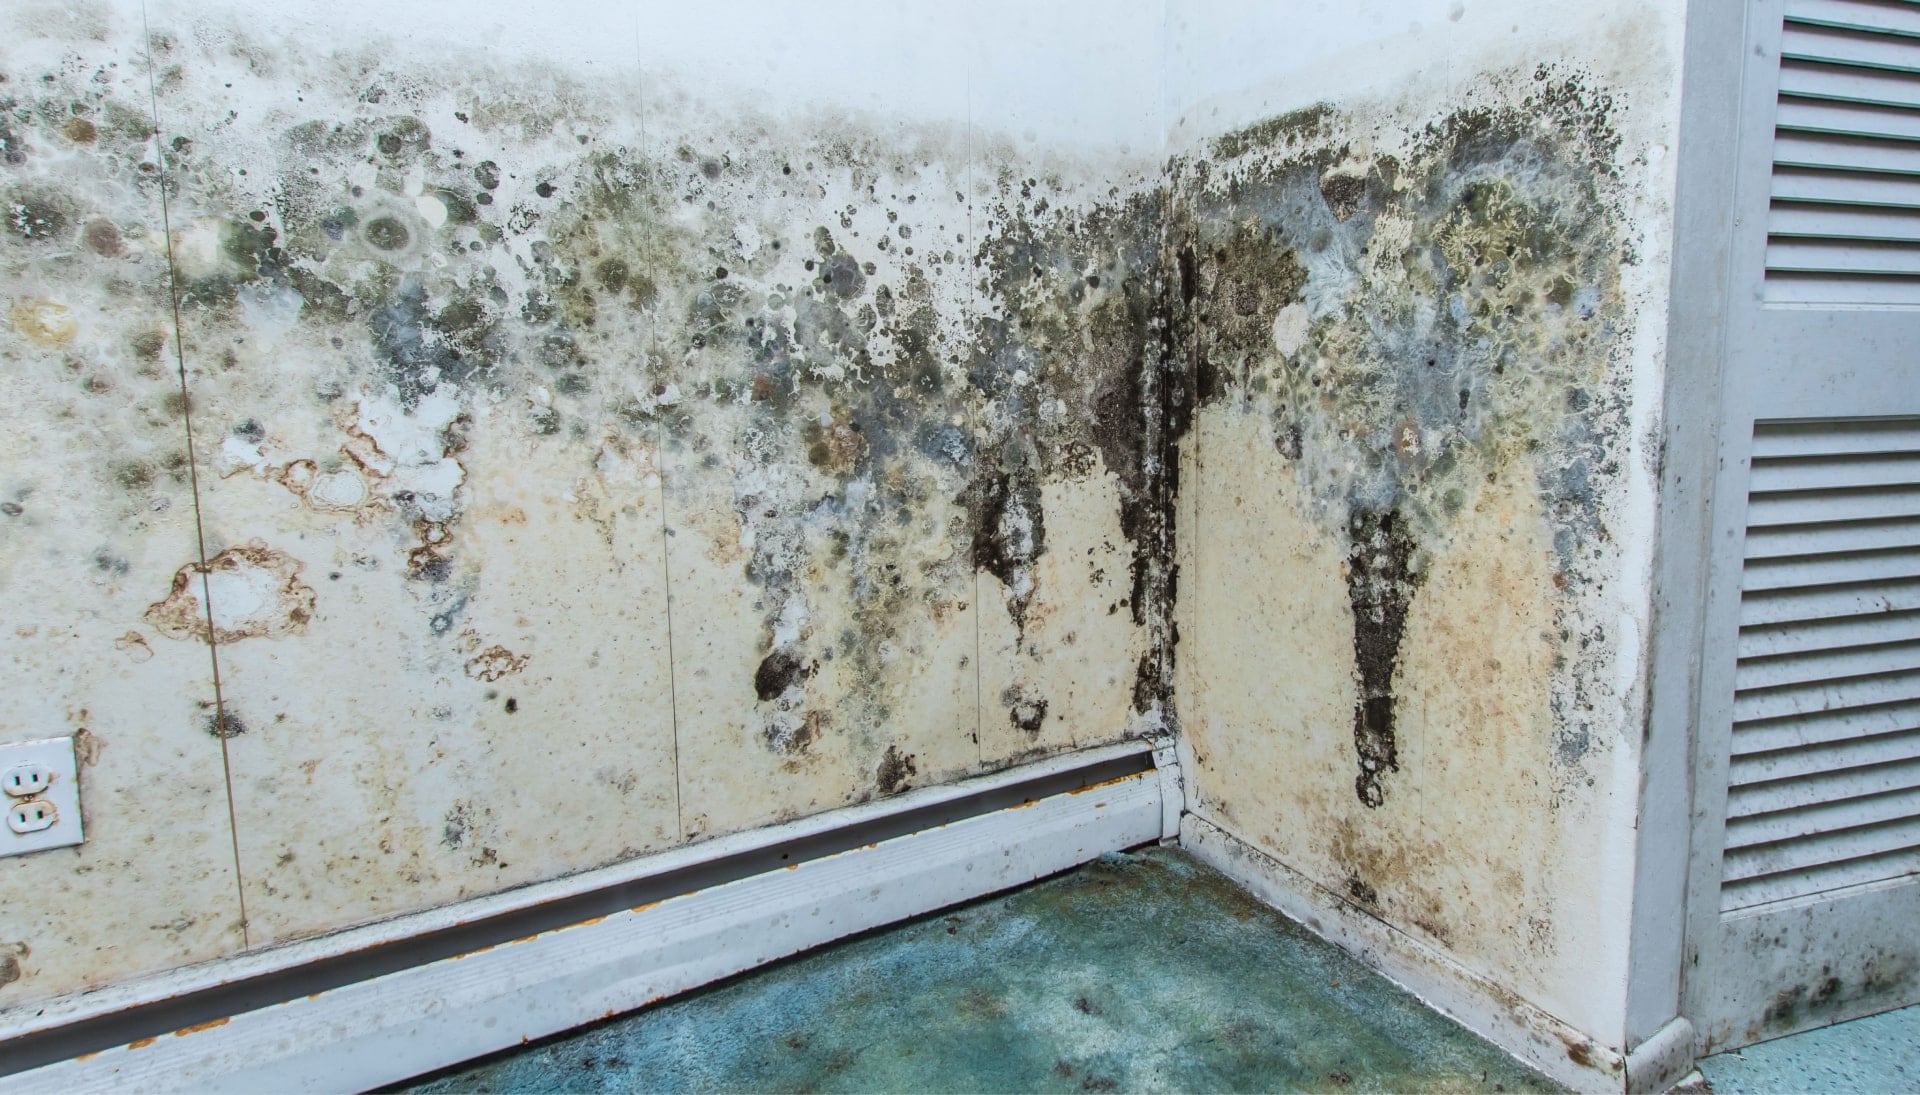 Professional mold removal, odor control, and water damage restoration service in Dayton, Ohio.